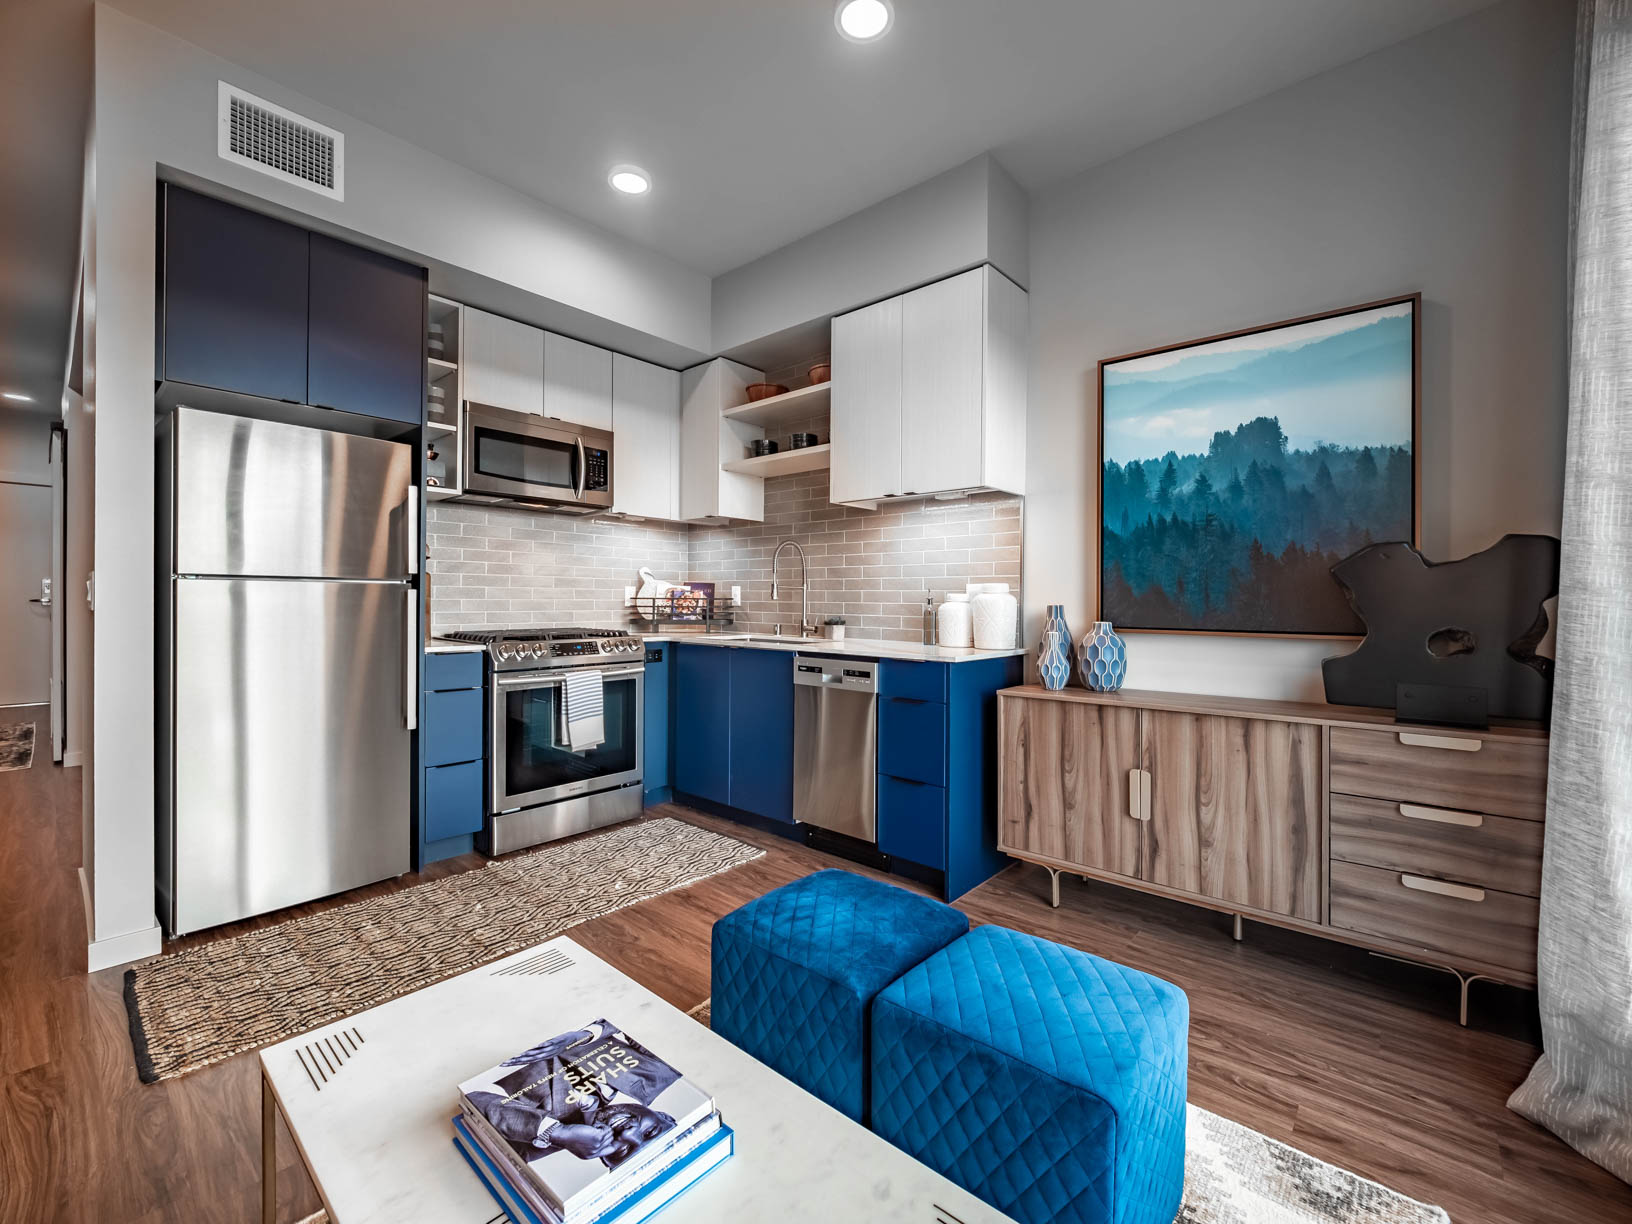 Furnished L-shaped apartment kitchen and living area with wood flooring, stainless steel appliances, two-tone cabinets, and tile backsplash.